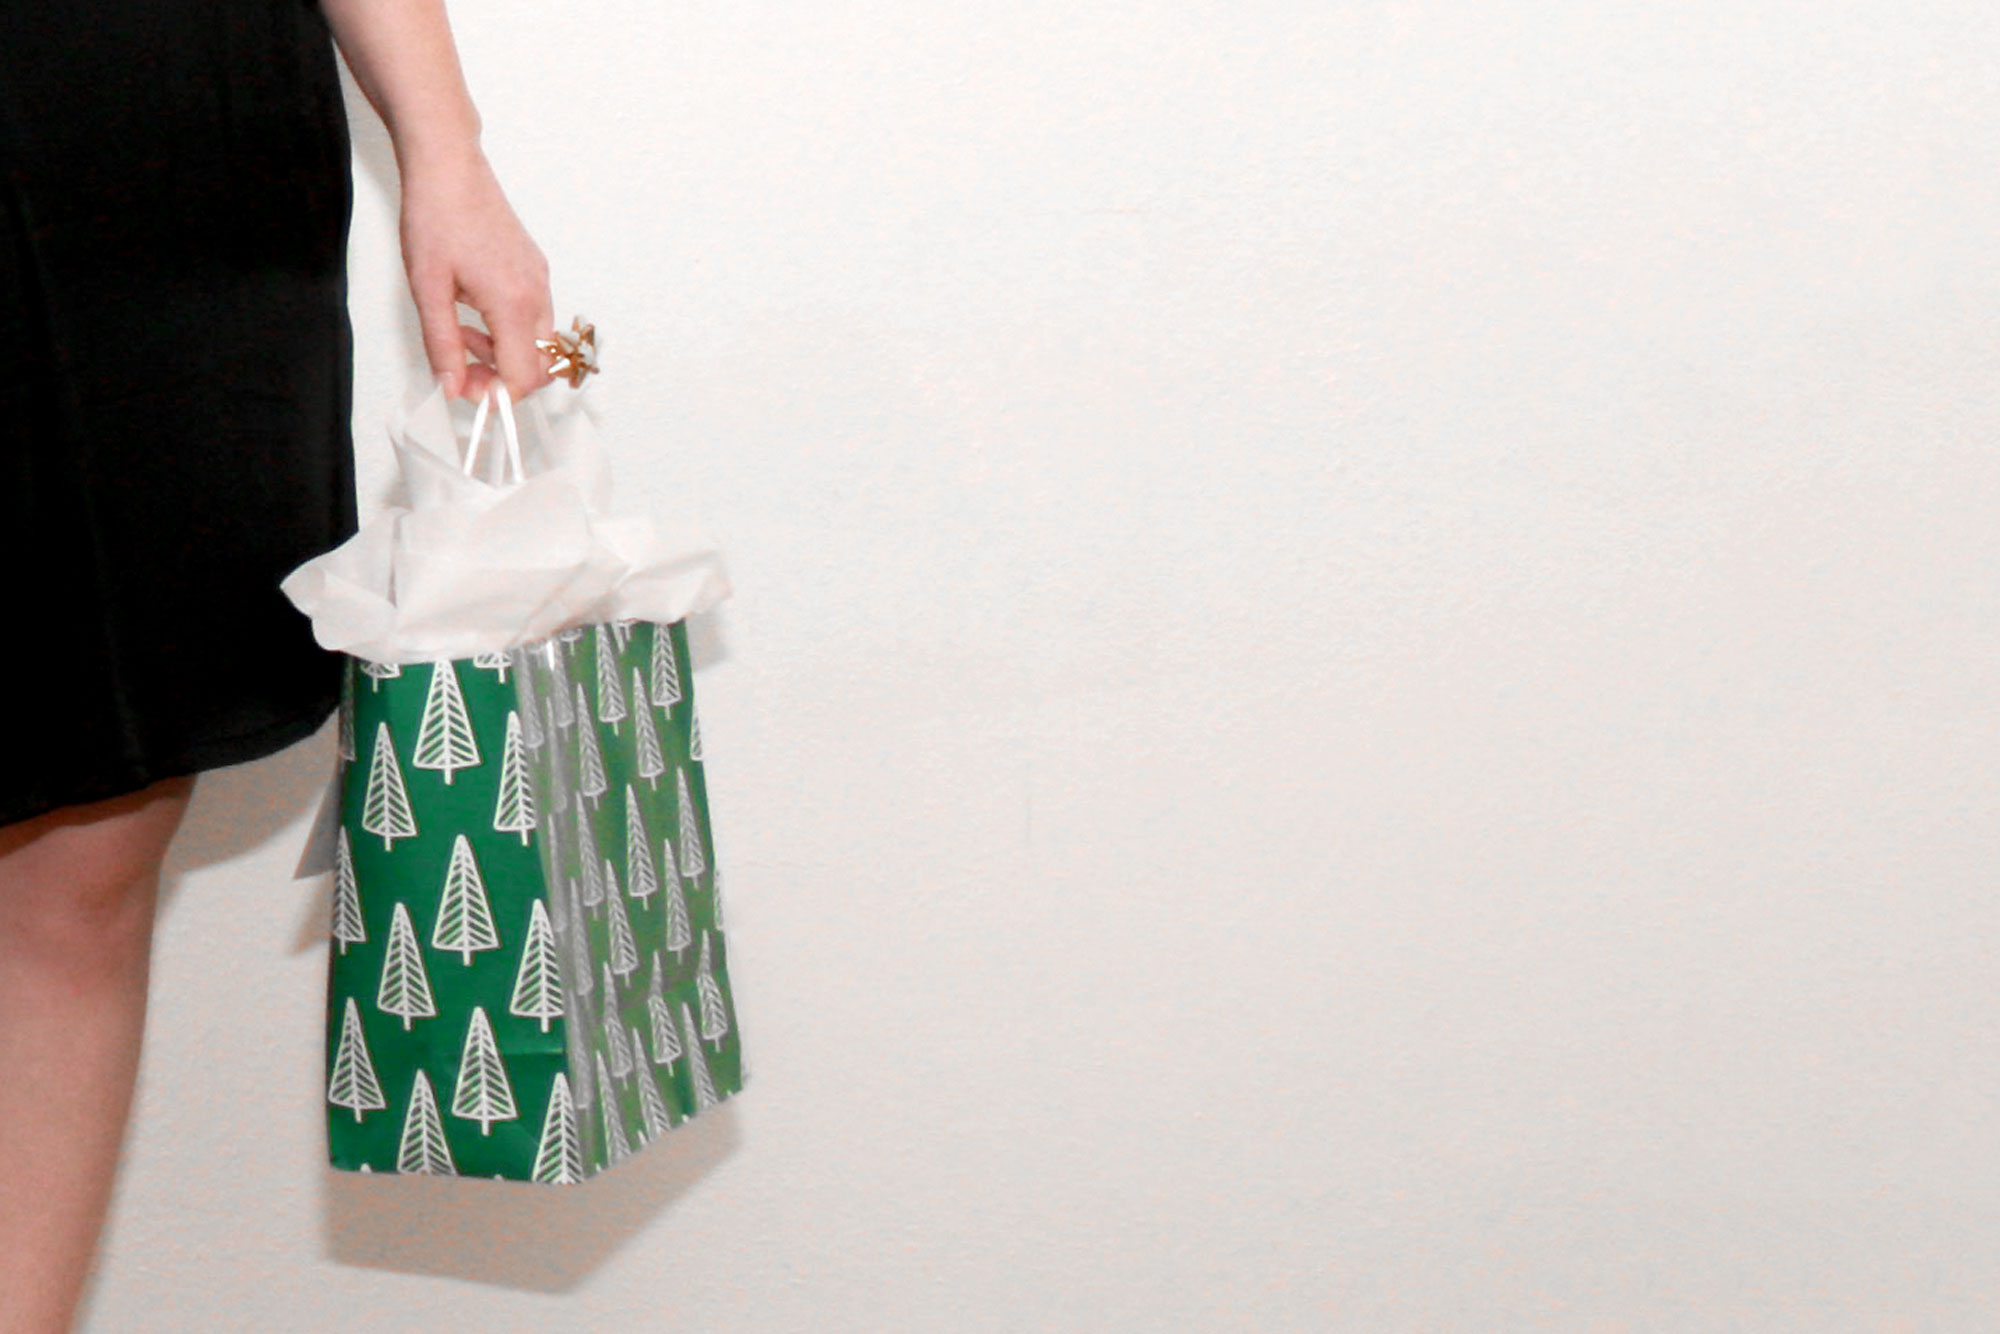 Alyssa holding a green gift bag in her left hand. The bag has trees icons on it, and she is wearing a gold ring in the shape of a bow